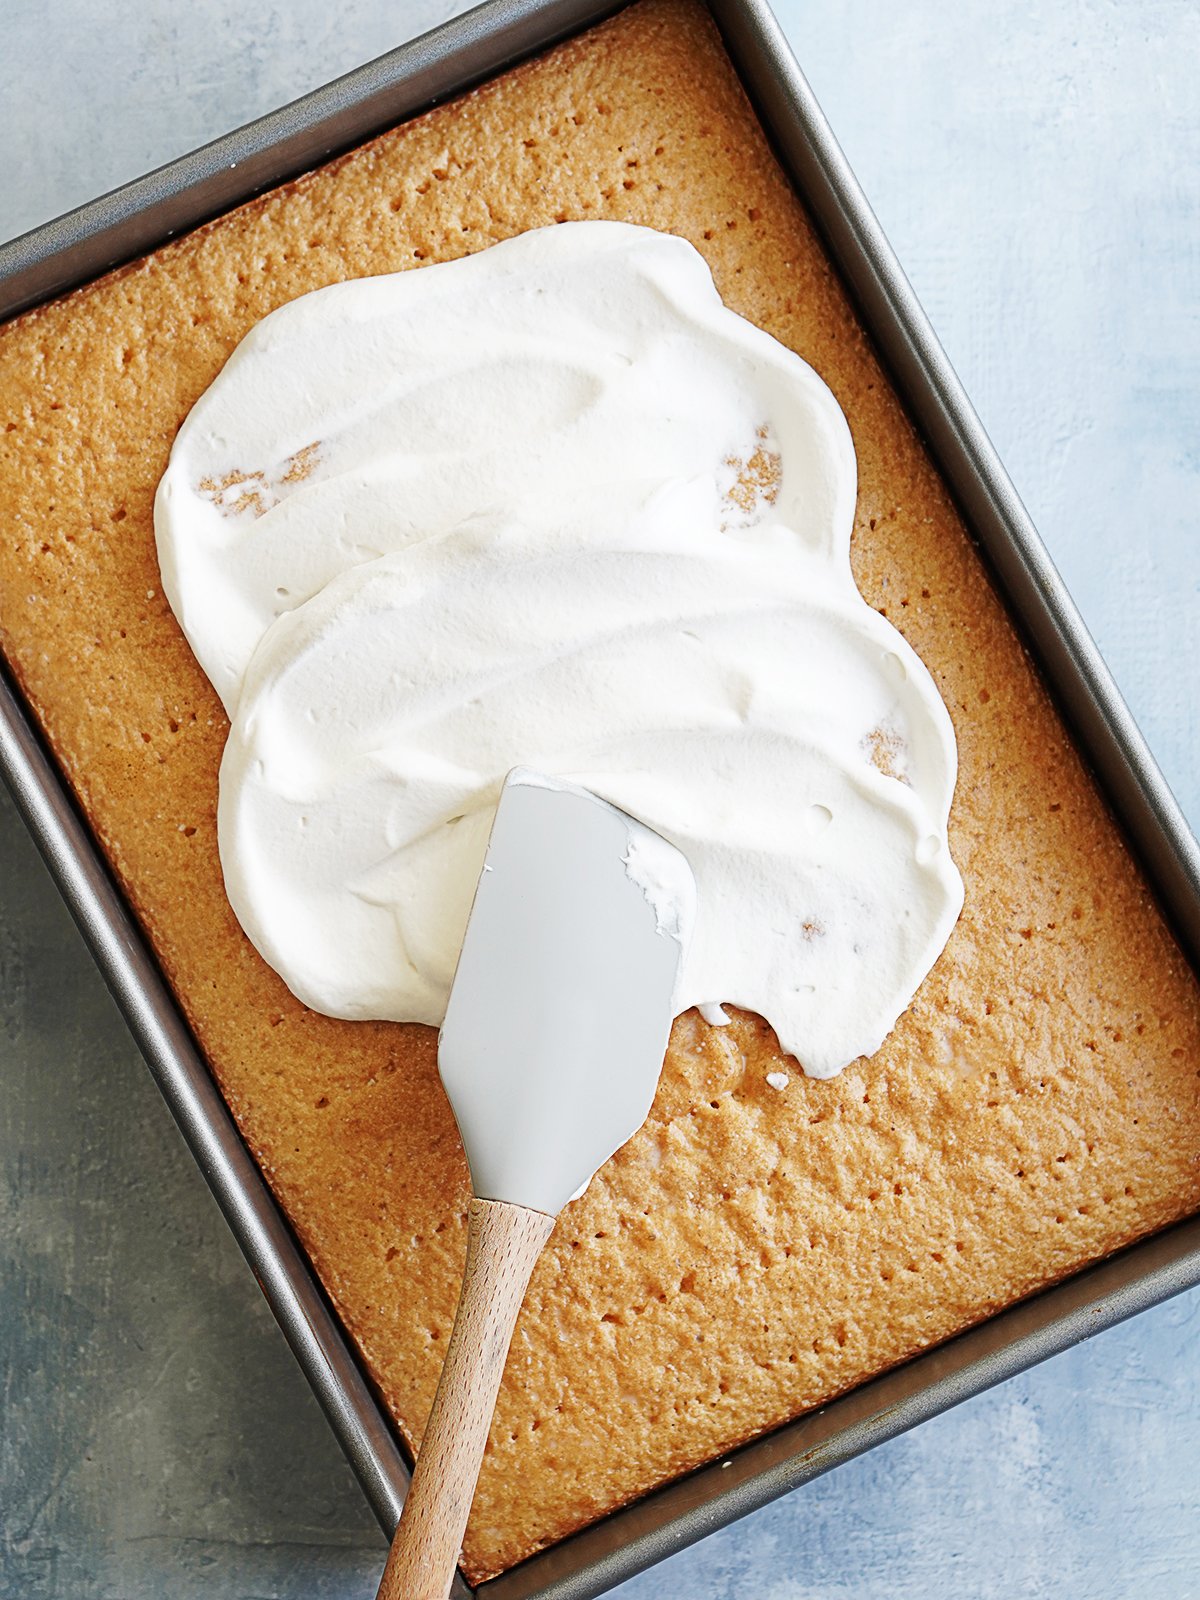 Cake in a baking pan being frosted with whipped cream